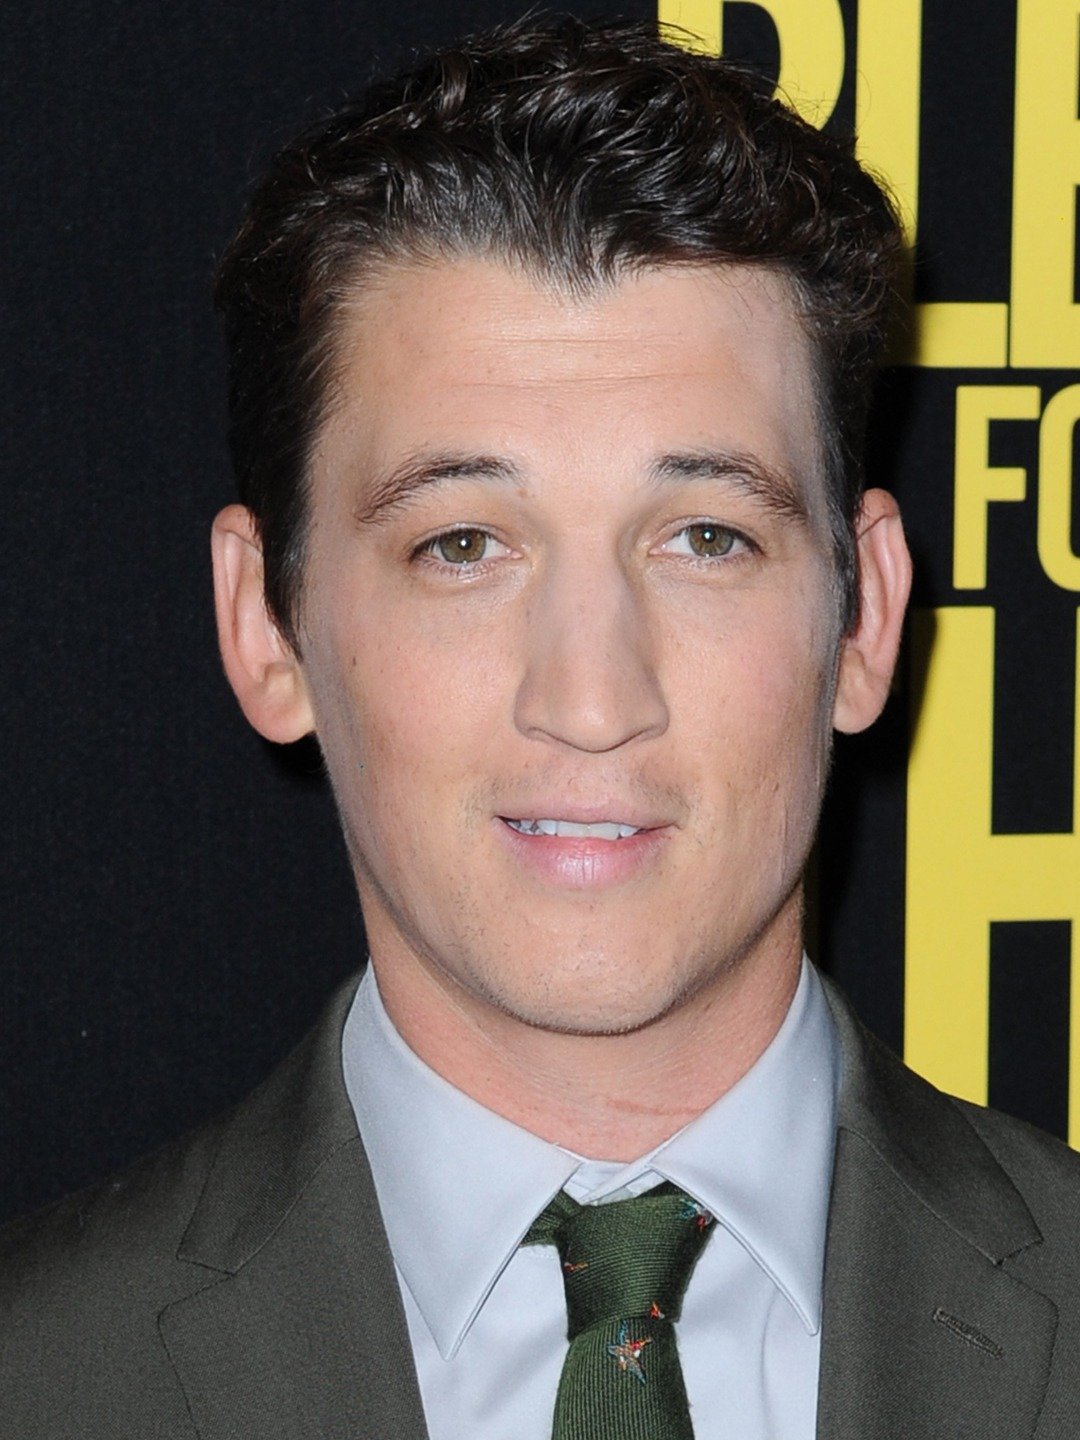 How tall is Miles Teller?